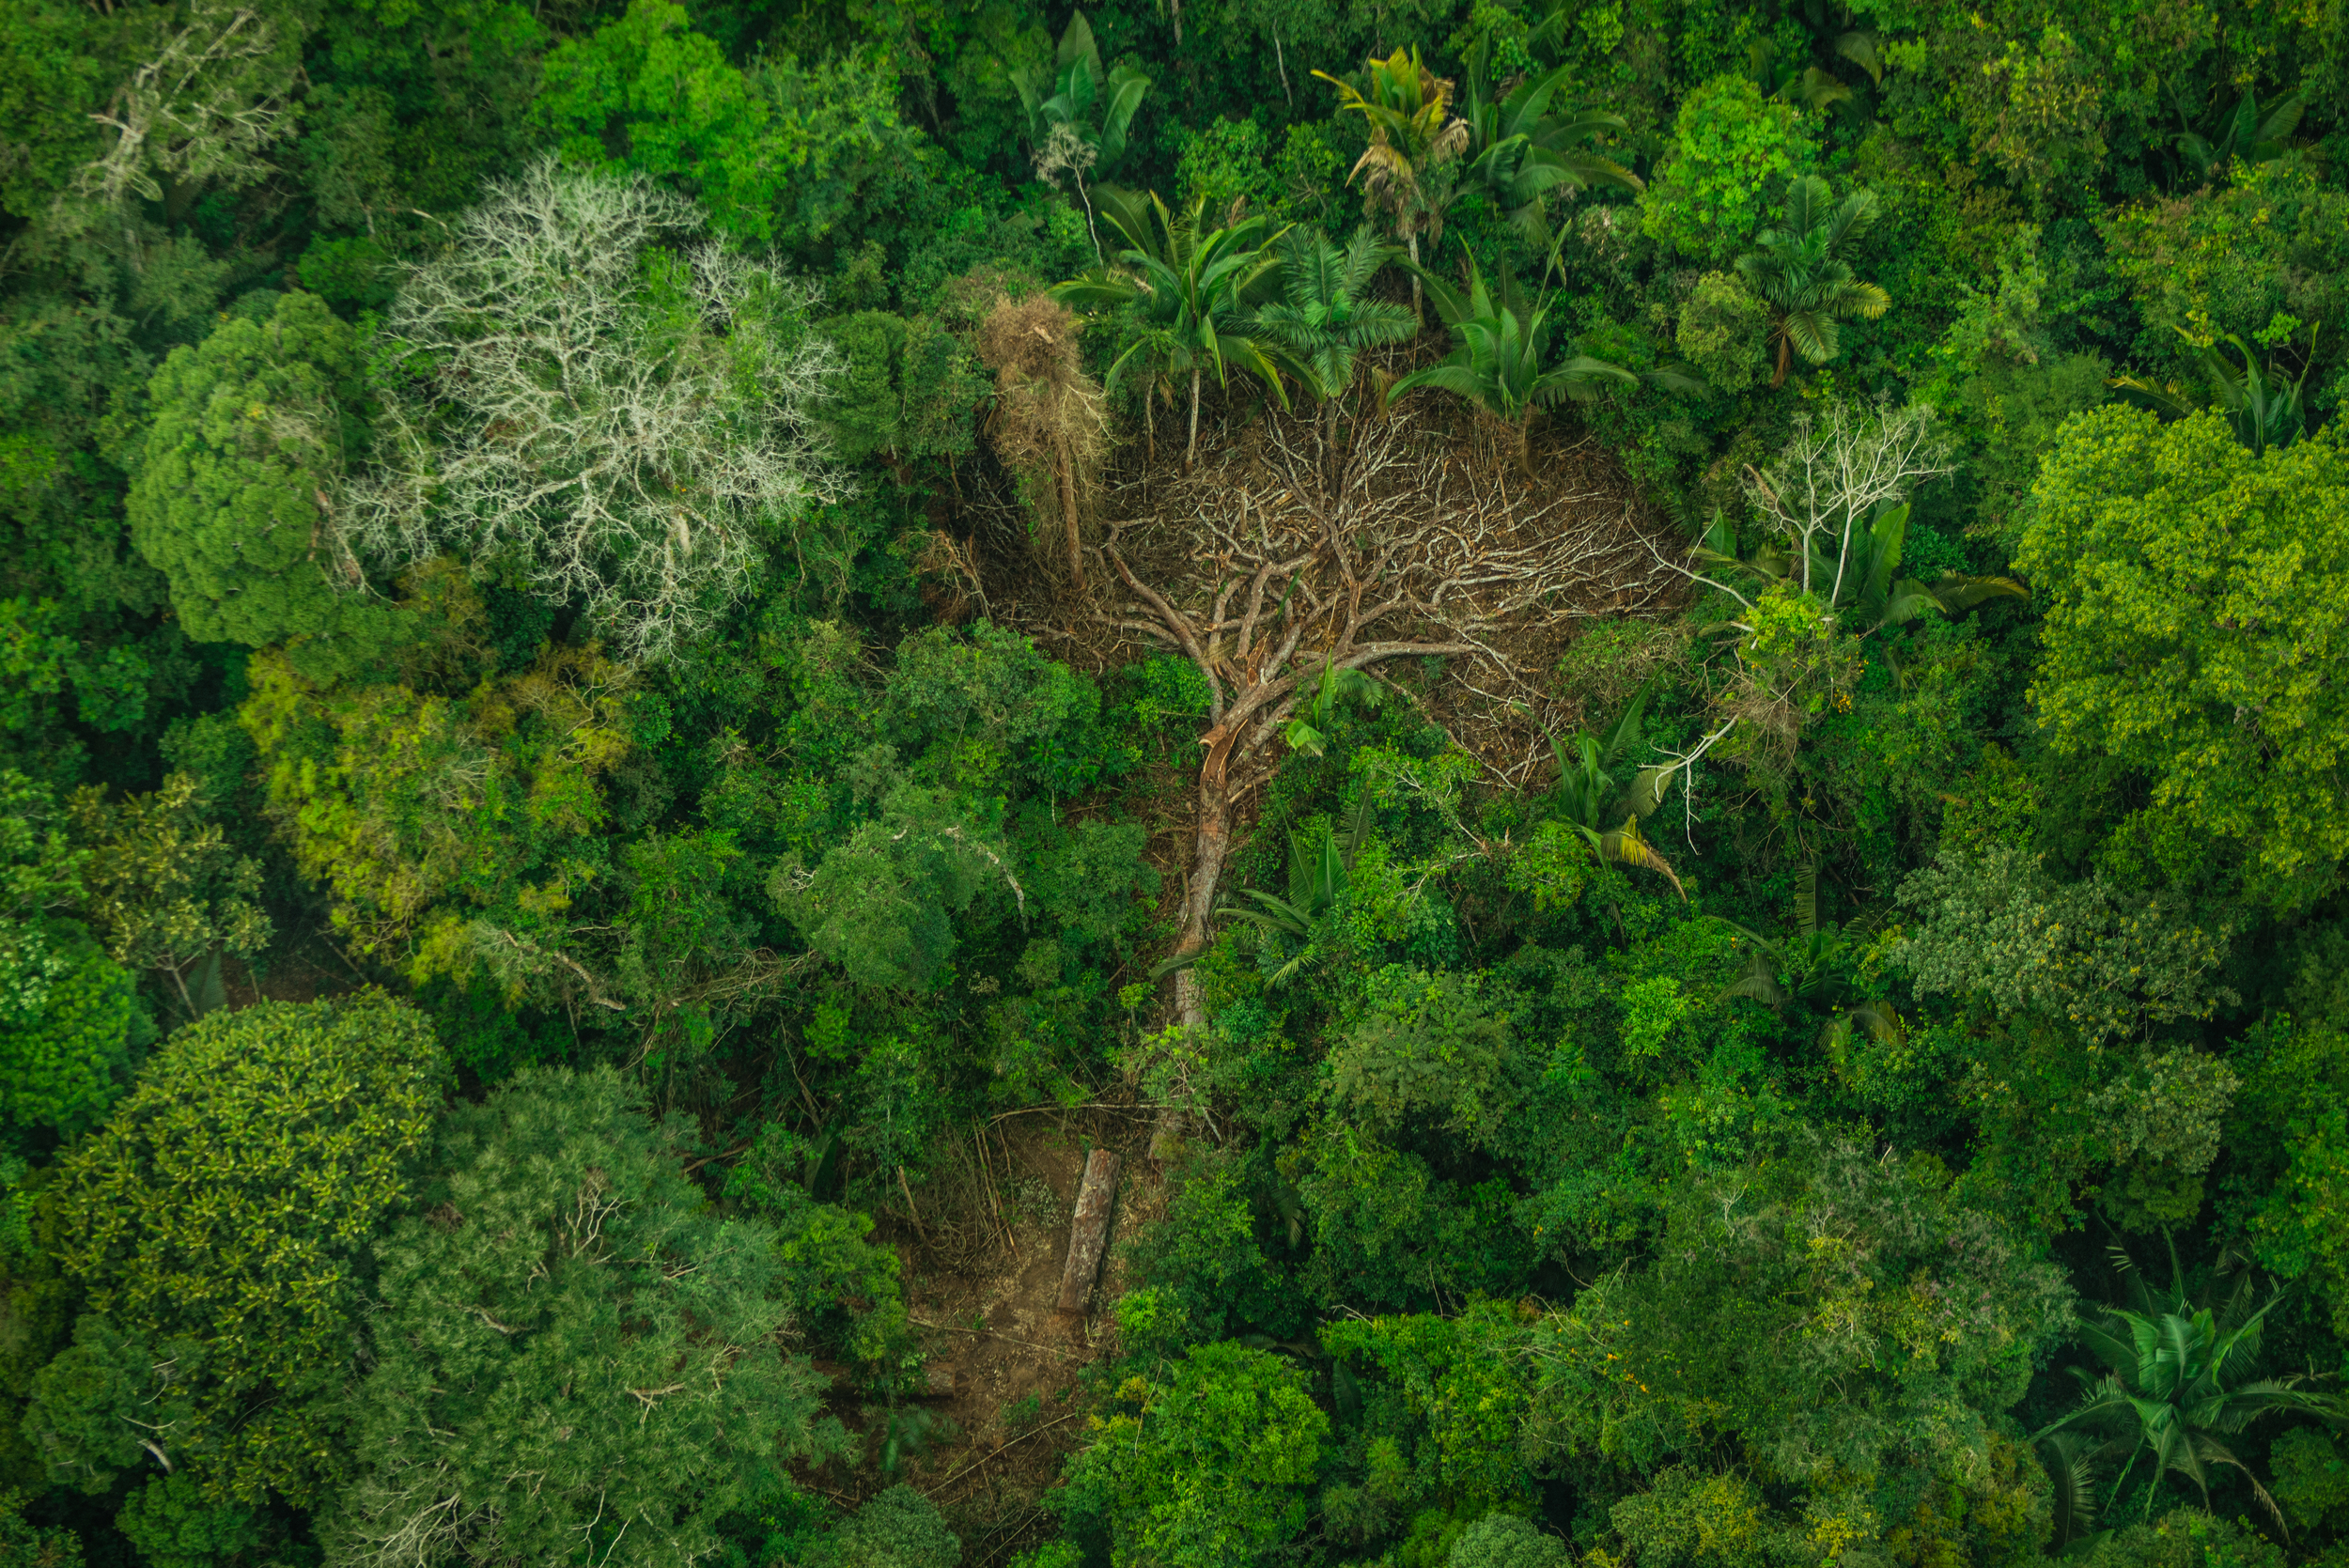 Aerial view of a lush Amazon rainforest canopy. One large tree has fallen, leaving a horizontal tree-shaped hole in the canopy.